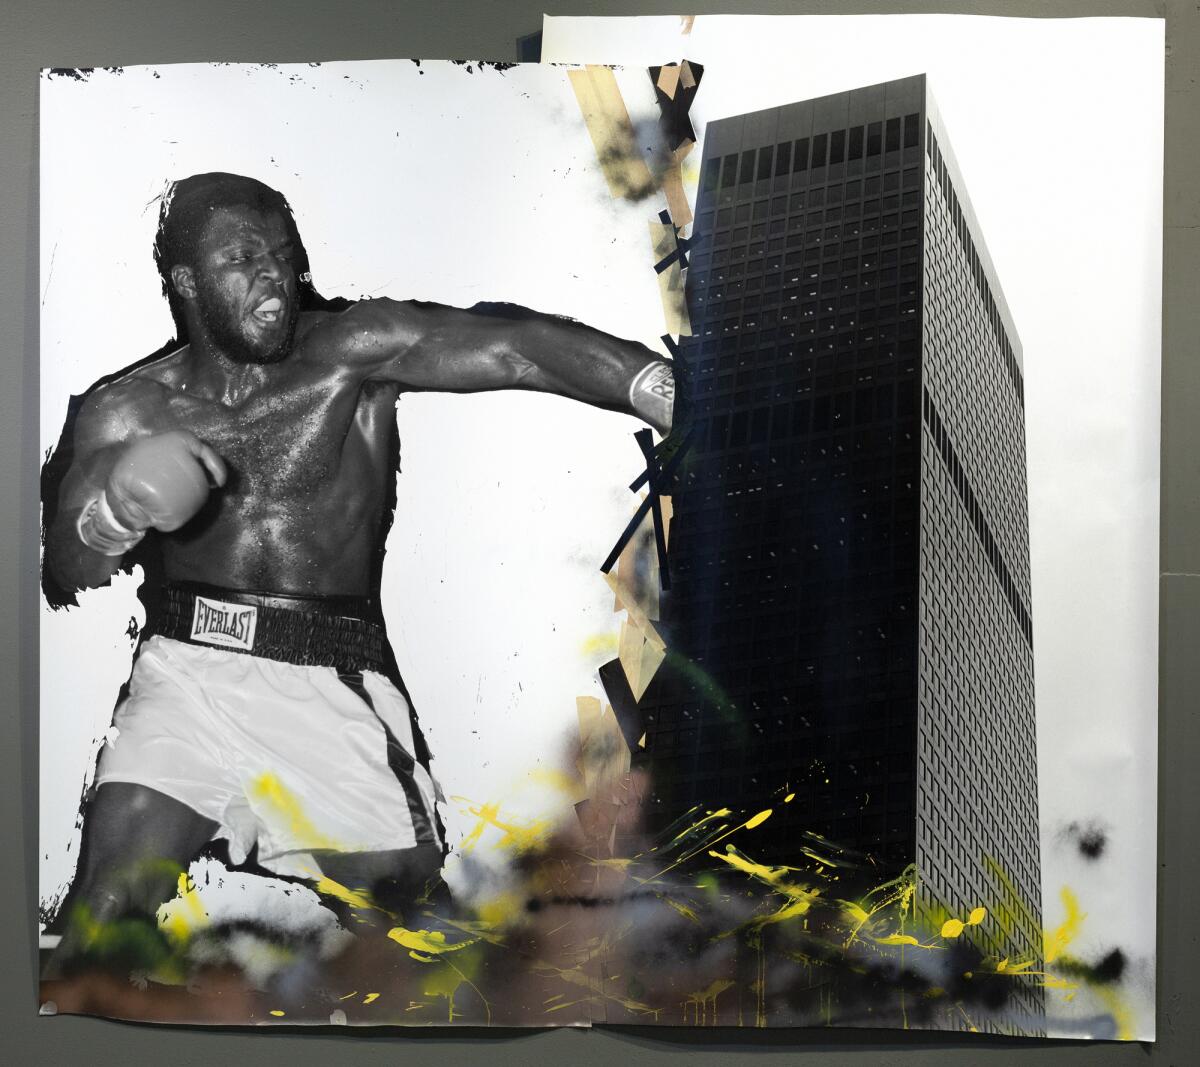 A boxer as tall as a skyscraper punches a building in "Support Systems," a 1984 mixed-media work by Todd Gray.